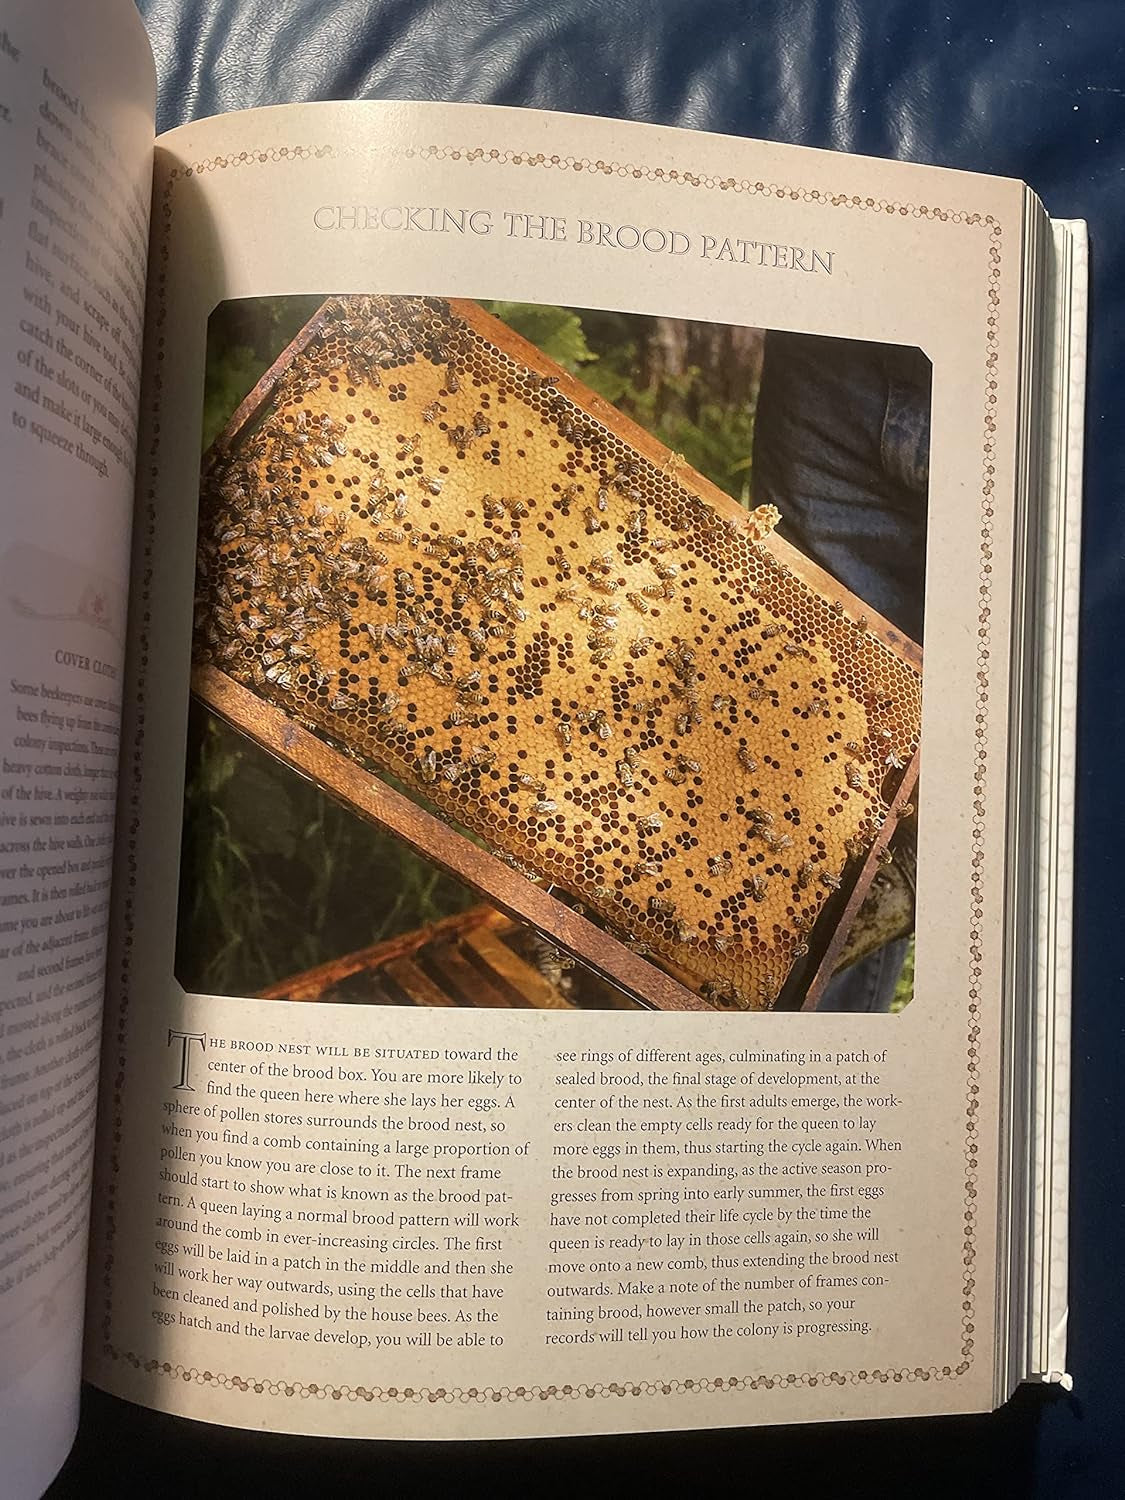 The Beekeeper'S Bible: Bees, Honey, Recipes & Other Home Uses